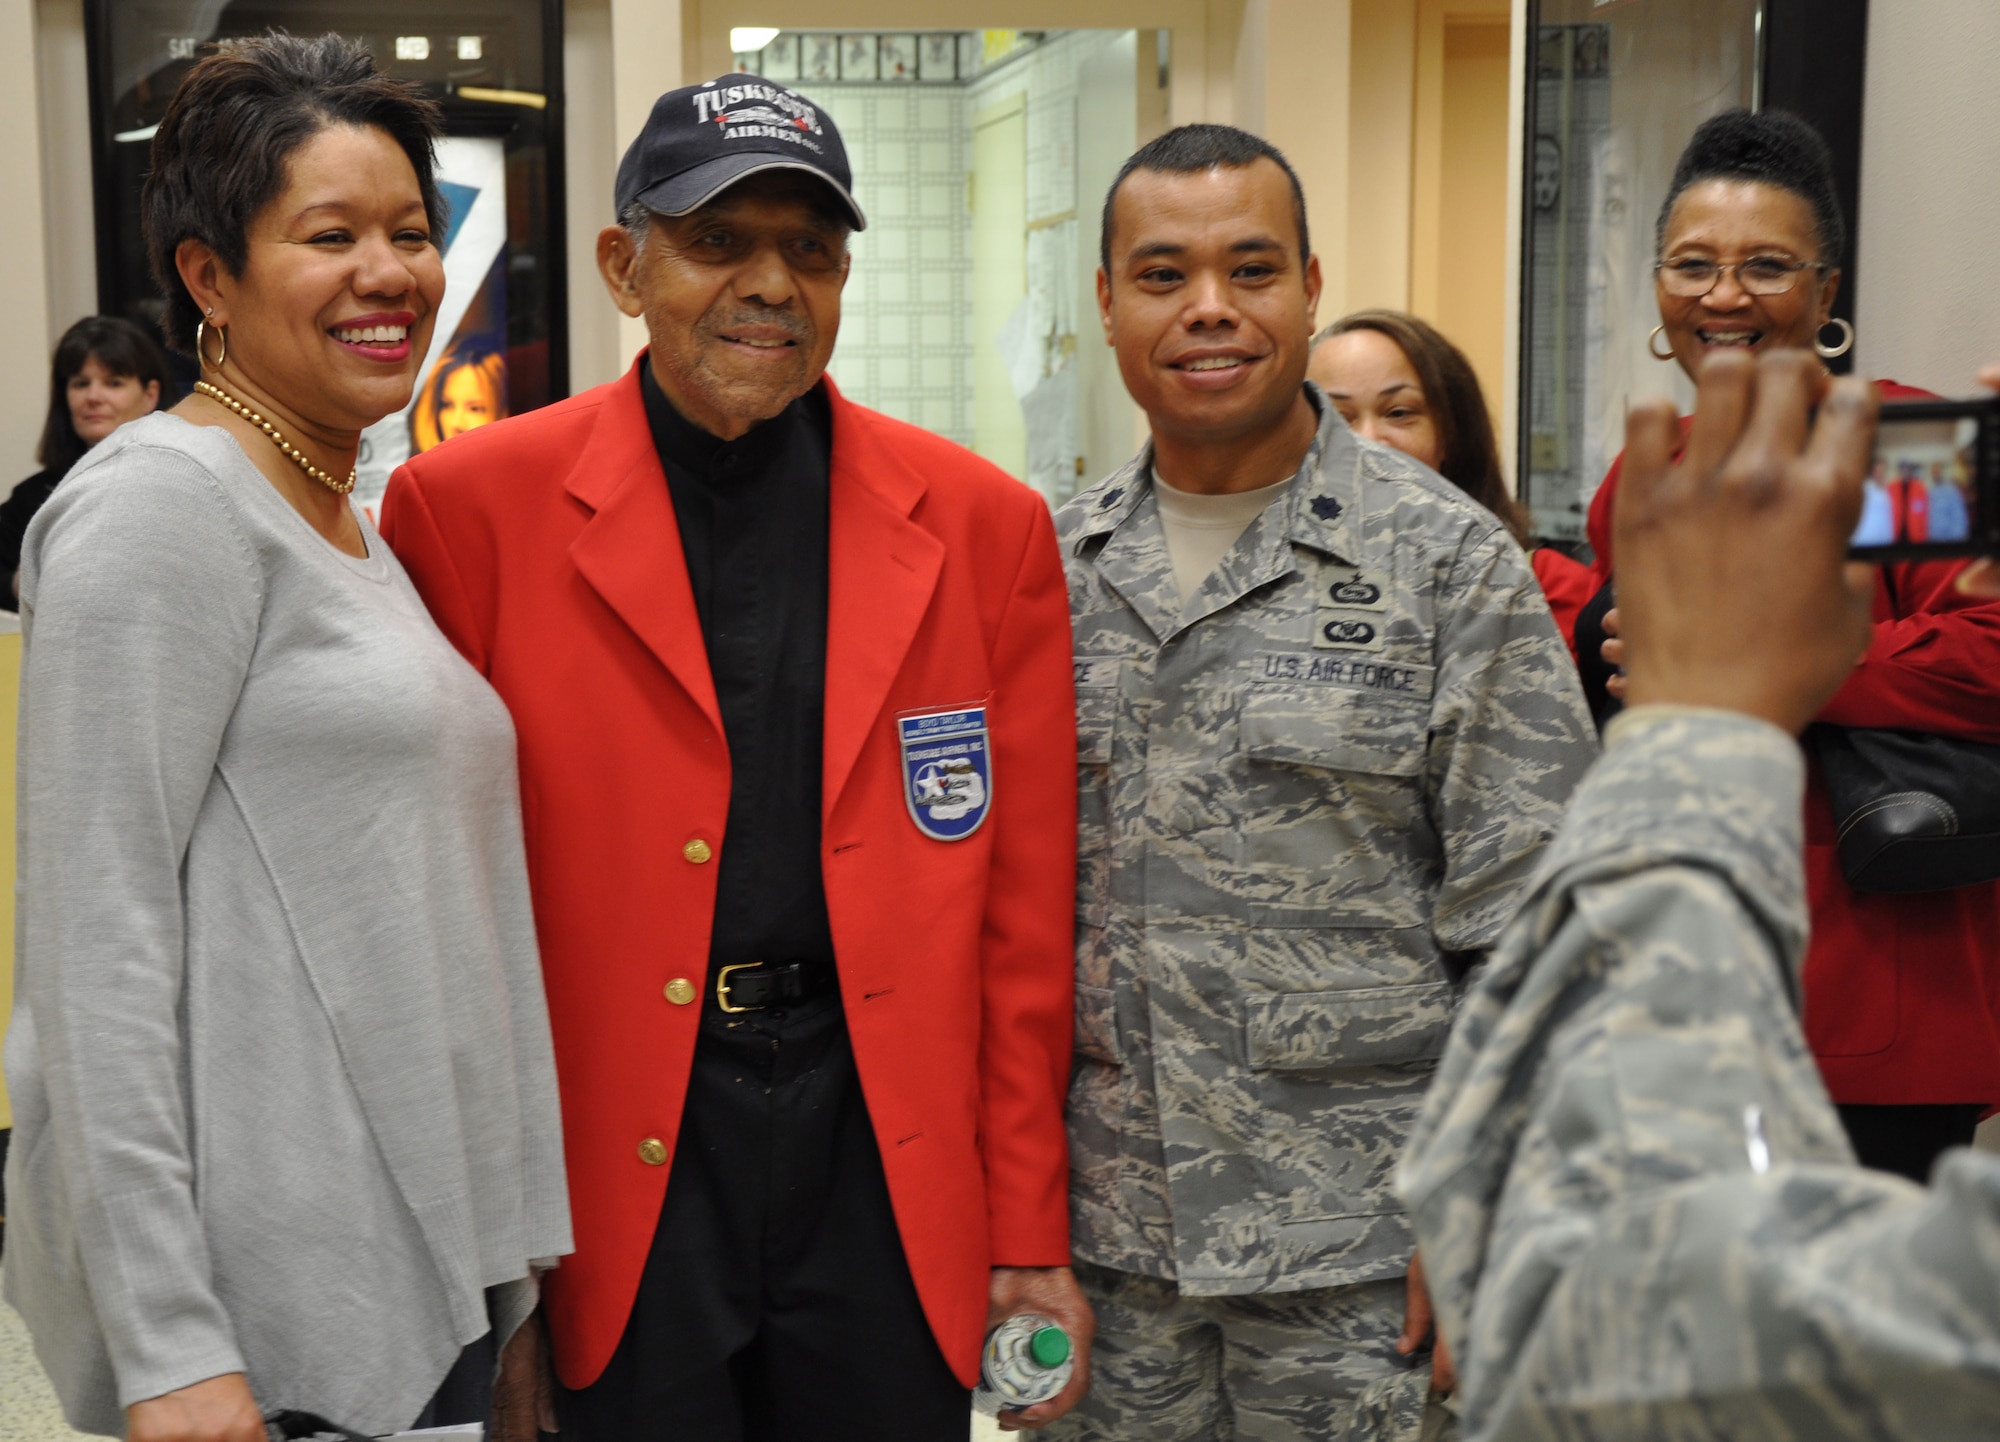 Tuskegee Airmen Tech. Sgt. (Ret.) Boyd Taylor (center) poses for a photo with Lt. Col. James Lawrence and his wife Khim, at the base theater at Beale Air Force Base Calif., Feb. 24, 2012. Tuskegee Airmen from a local TA inc. chapter showed a screening of the movie “Red Tails” in honor of the base’s celebration of African-American/Black History Month. (U.S. Air Force photo by Staff Sgt. Robert M. Trujillo/Released)